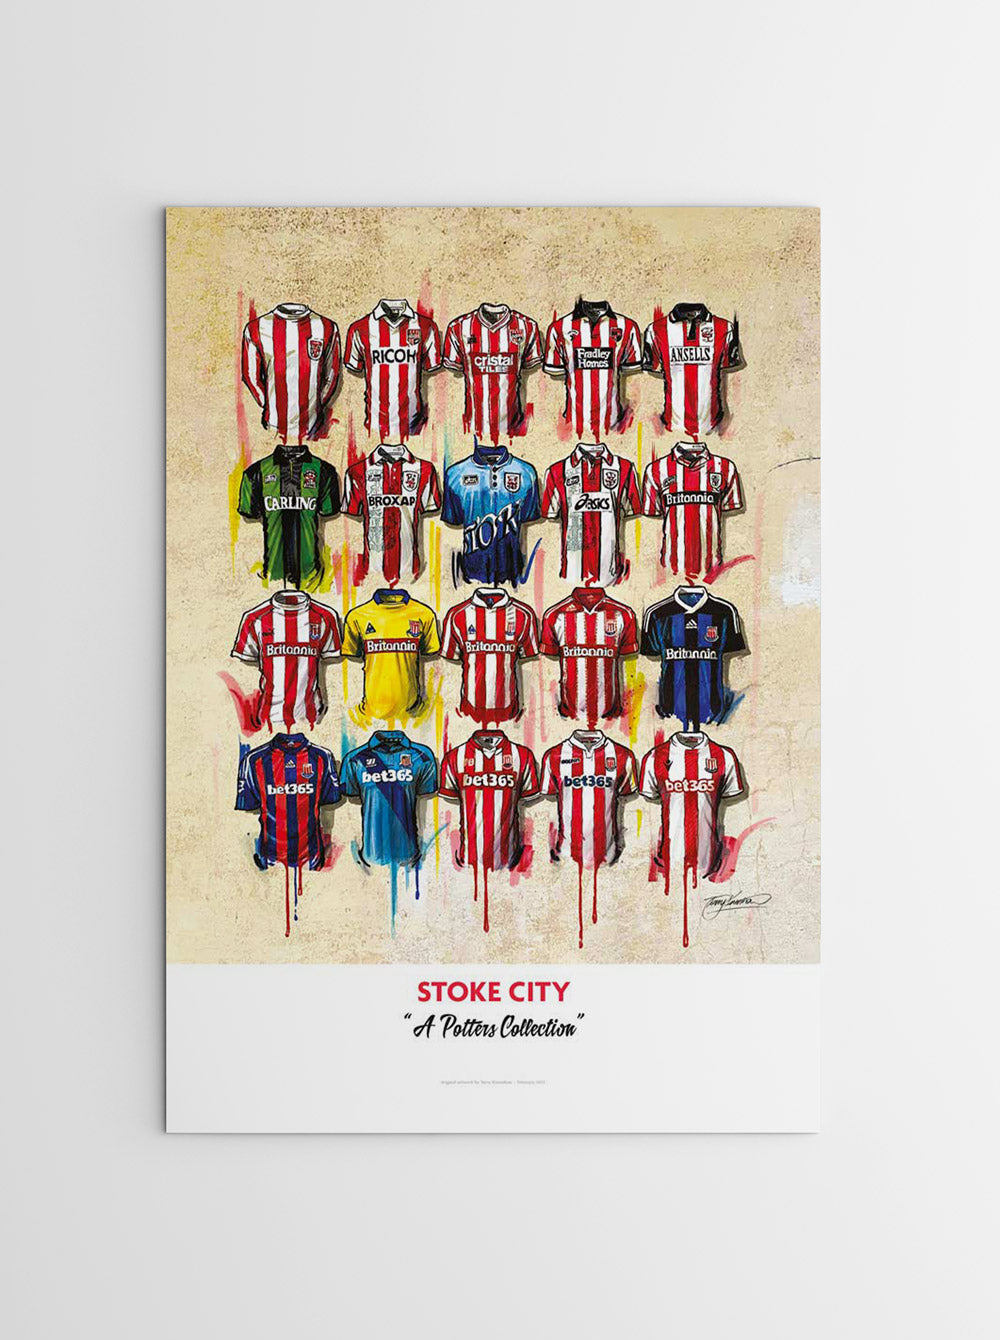 A limited edition A2 print by artist Terry Kneeshaw, featuring 20 iconic jerseys from the history of Stoke City football team. The artwork has a vintage feel, with muted colors and a slightly distressed texture. The jerseys include classic designs such as the red and white striped shirt and the predominantly red shirt with a white hoop, as well as recent designs. Perfect for any Stoke City fan.